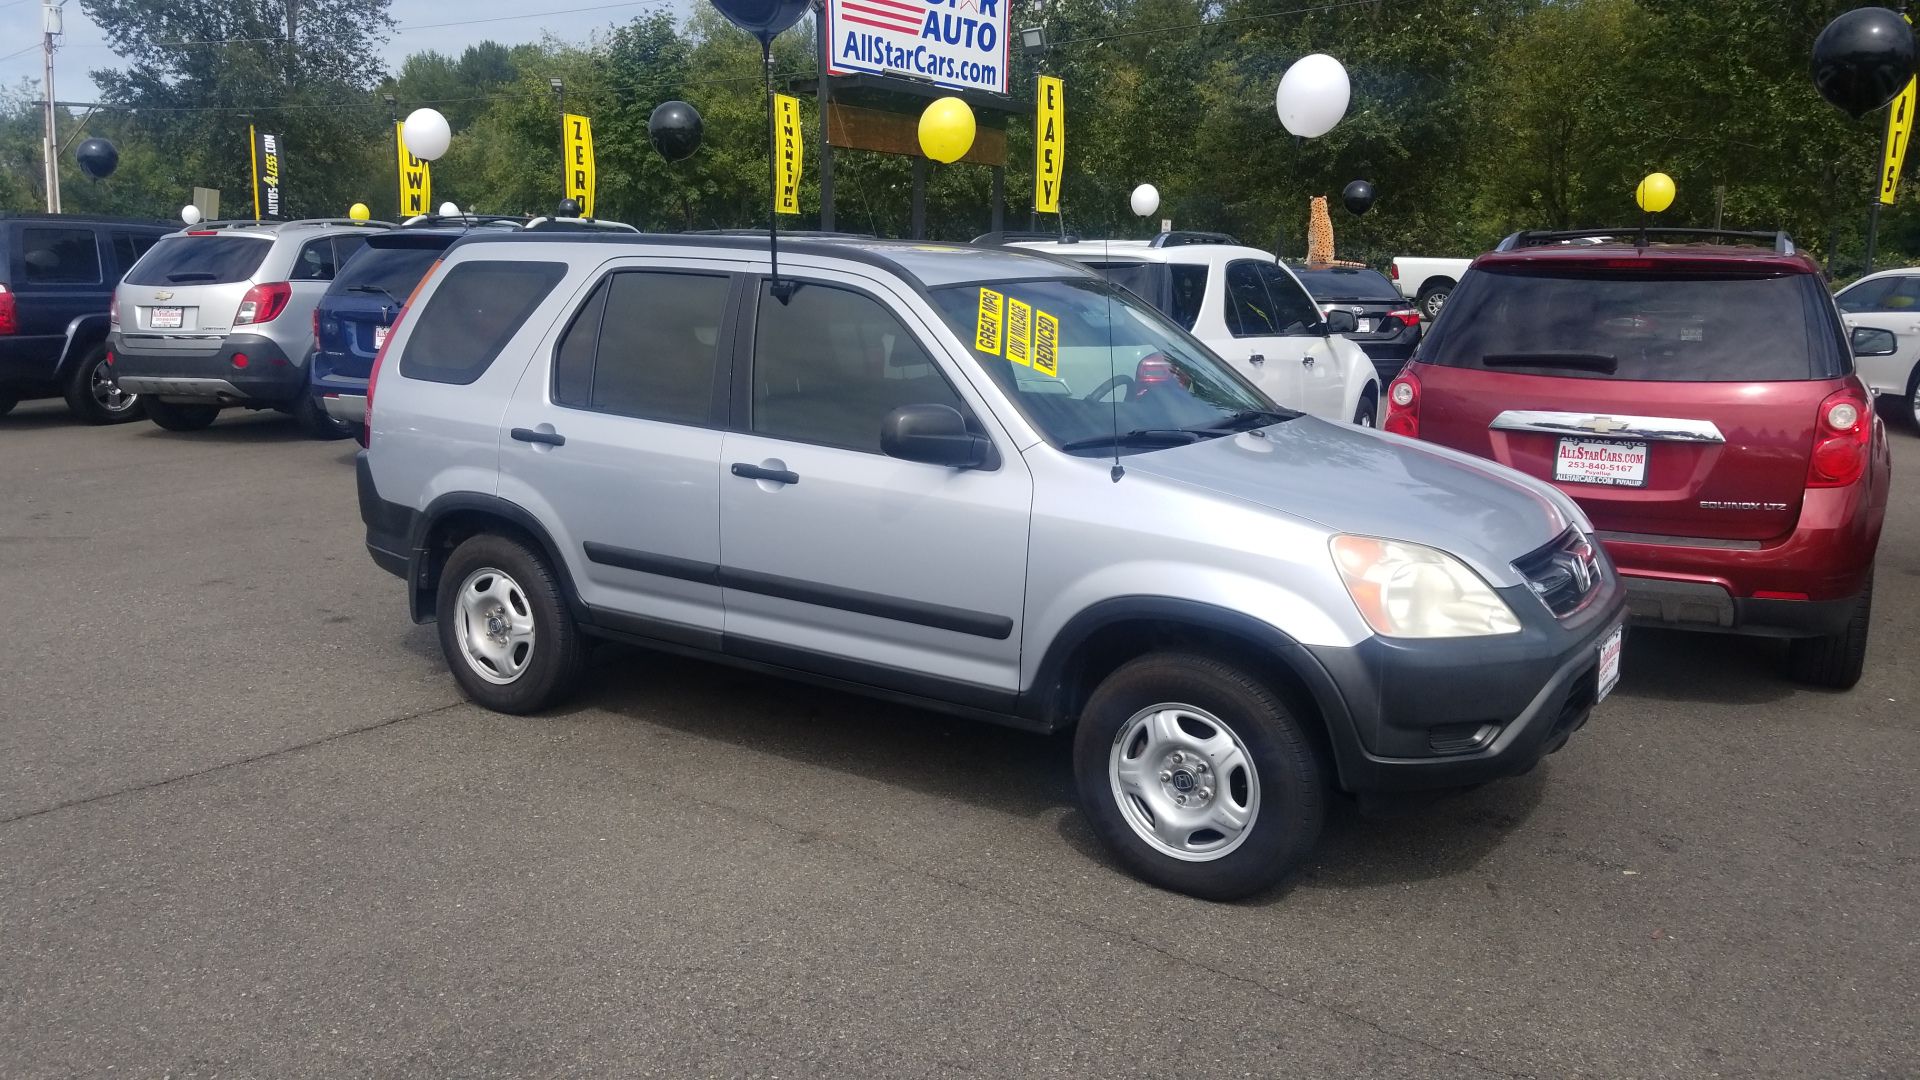 2002 Honda CRV very clean local trade in. We finance if you need it